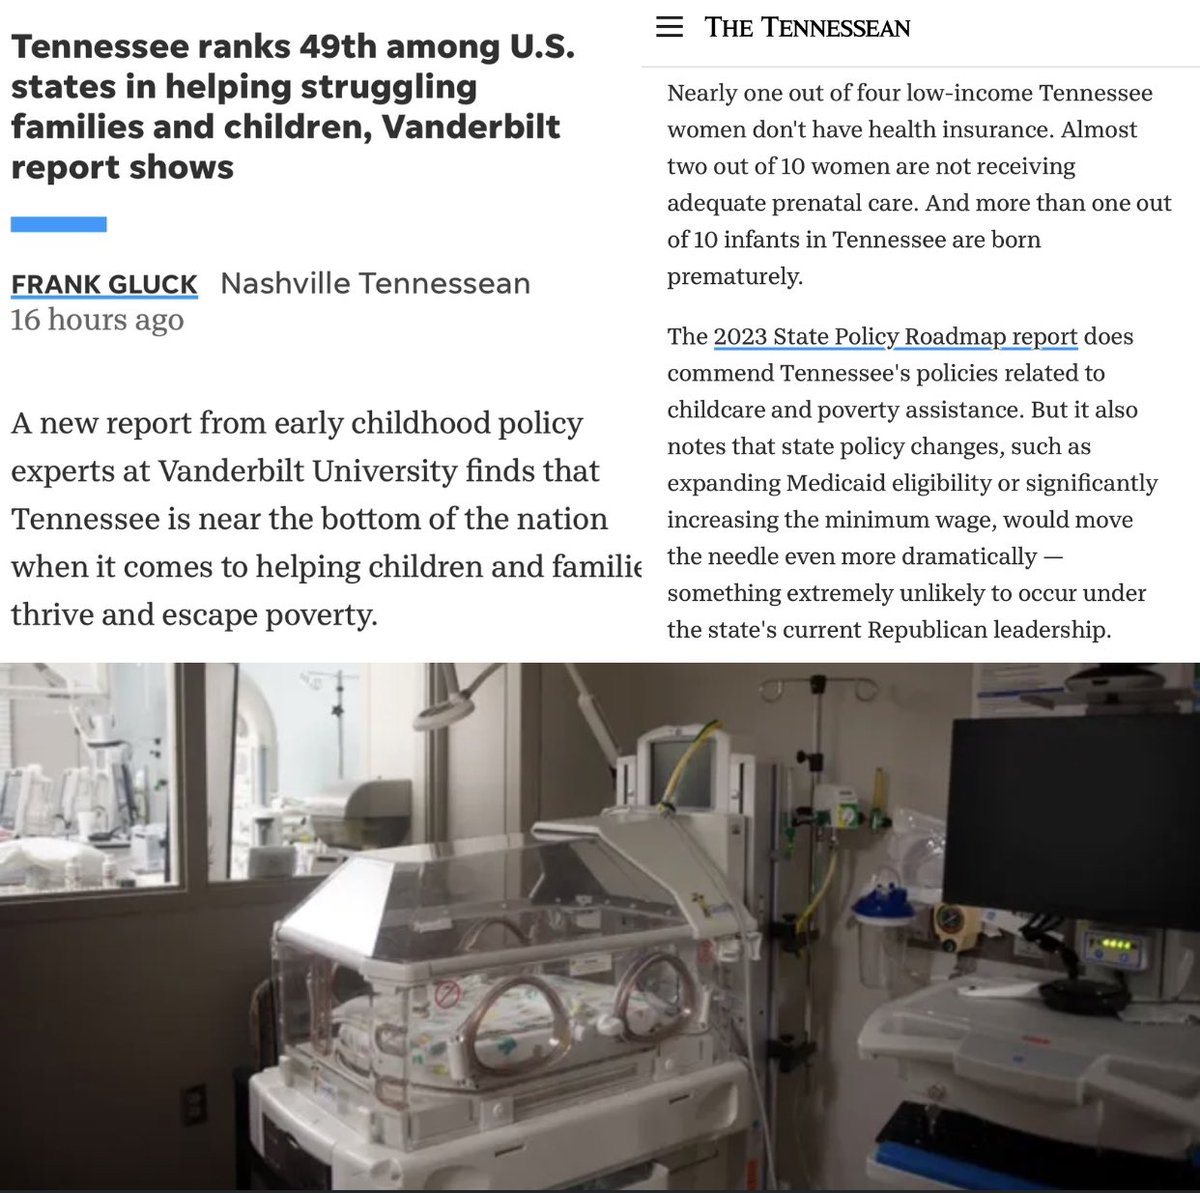 ICYMI — Tennessee 49th (!☹️) in helping struggling families & children… Bottom in infant & maternal mortality… “expanding Medicaid & raising the wage would help but unlikely under @TNGOP leadership…” But keep telling us how y’all value “life” tennessean.com/story/news/hea…